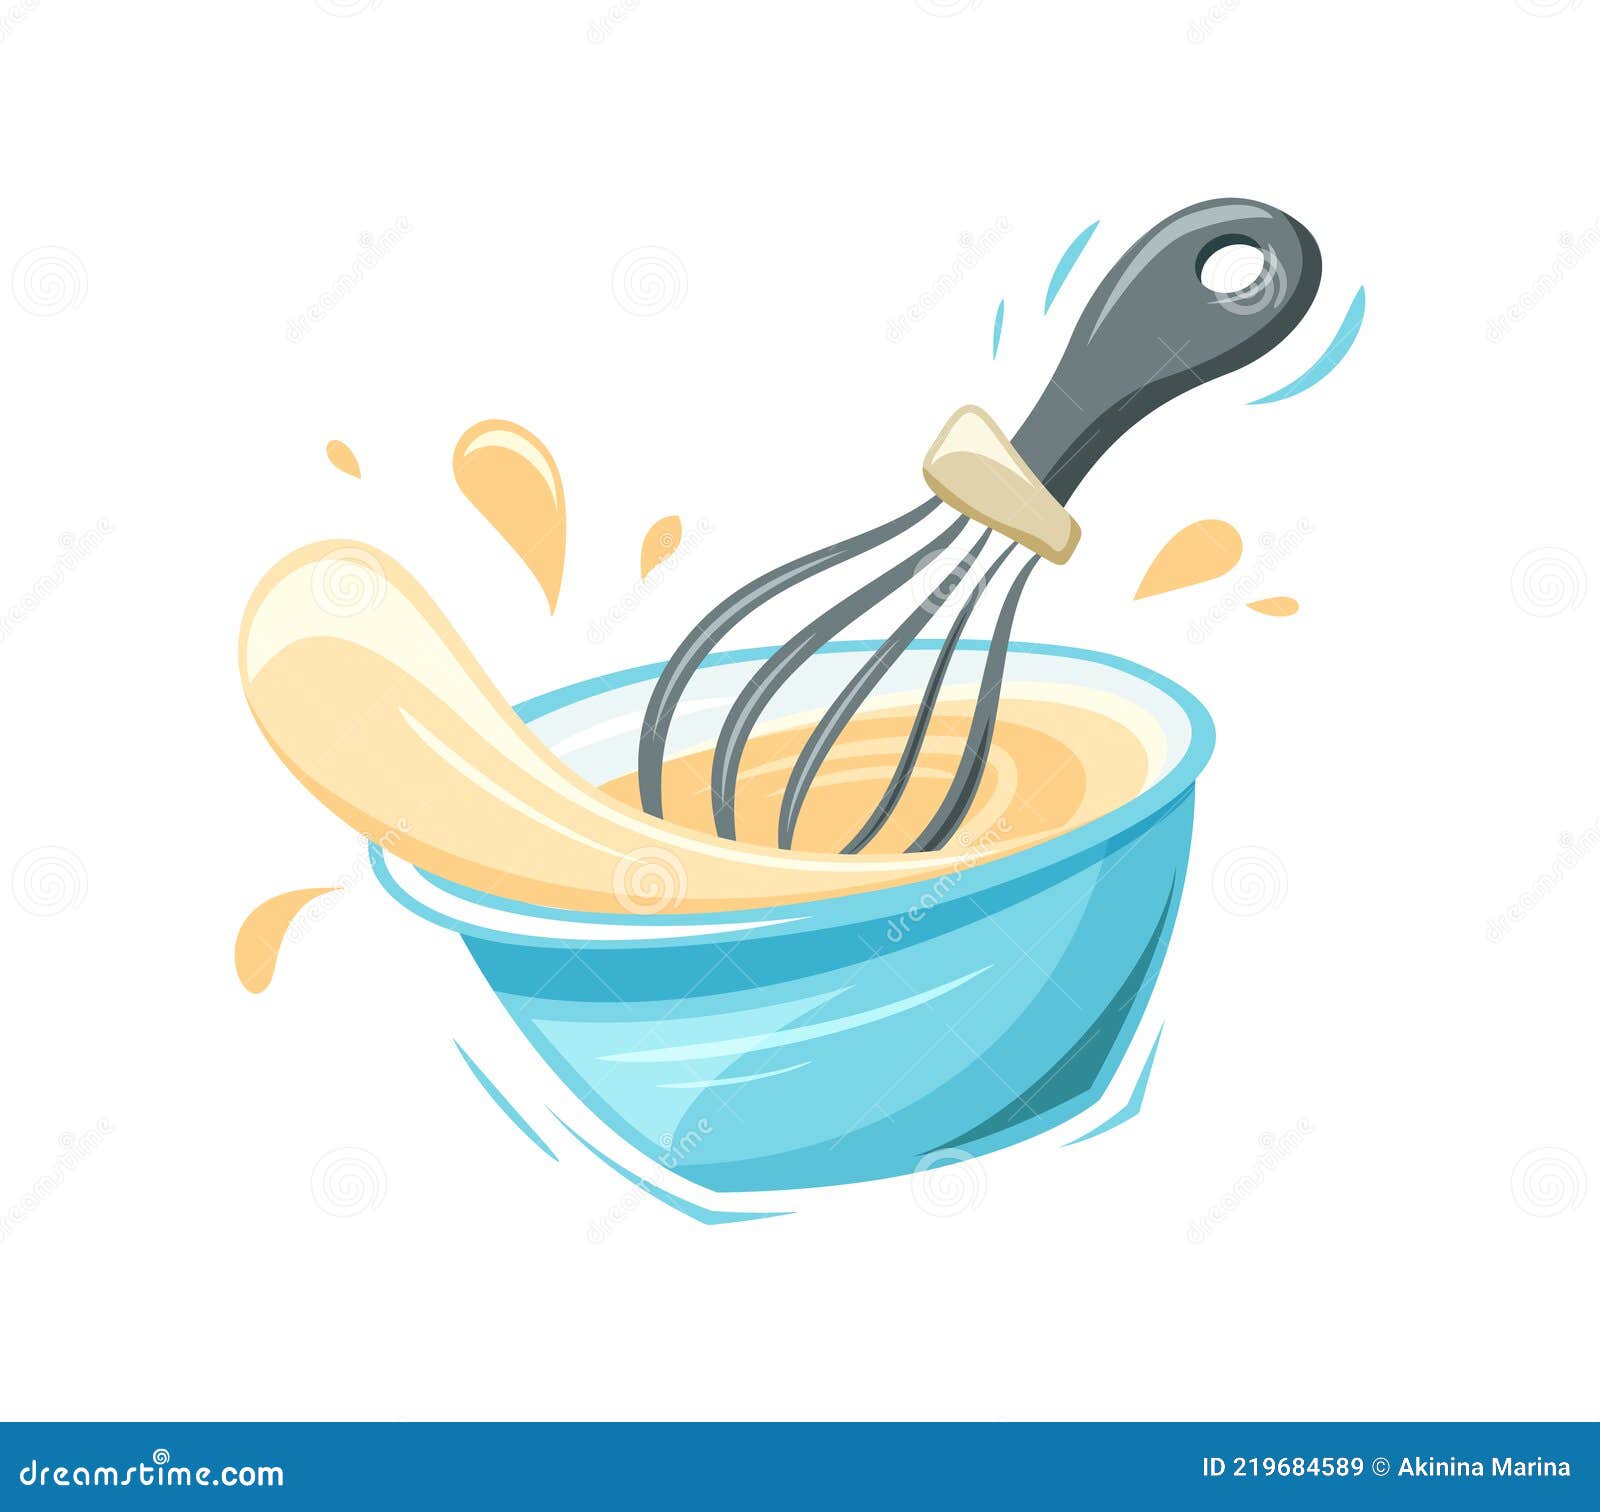 https://thumbs.dreamstime.com/z/bowl-whisk-stylized-kitchen-utensil-cartoon-flat-illustration-mixing-whipping-dough-sauce-cream-color-isolated-vector-219684589.jpg